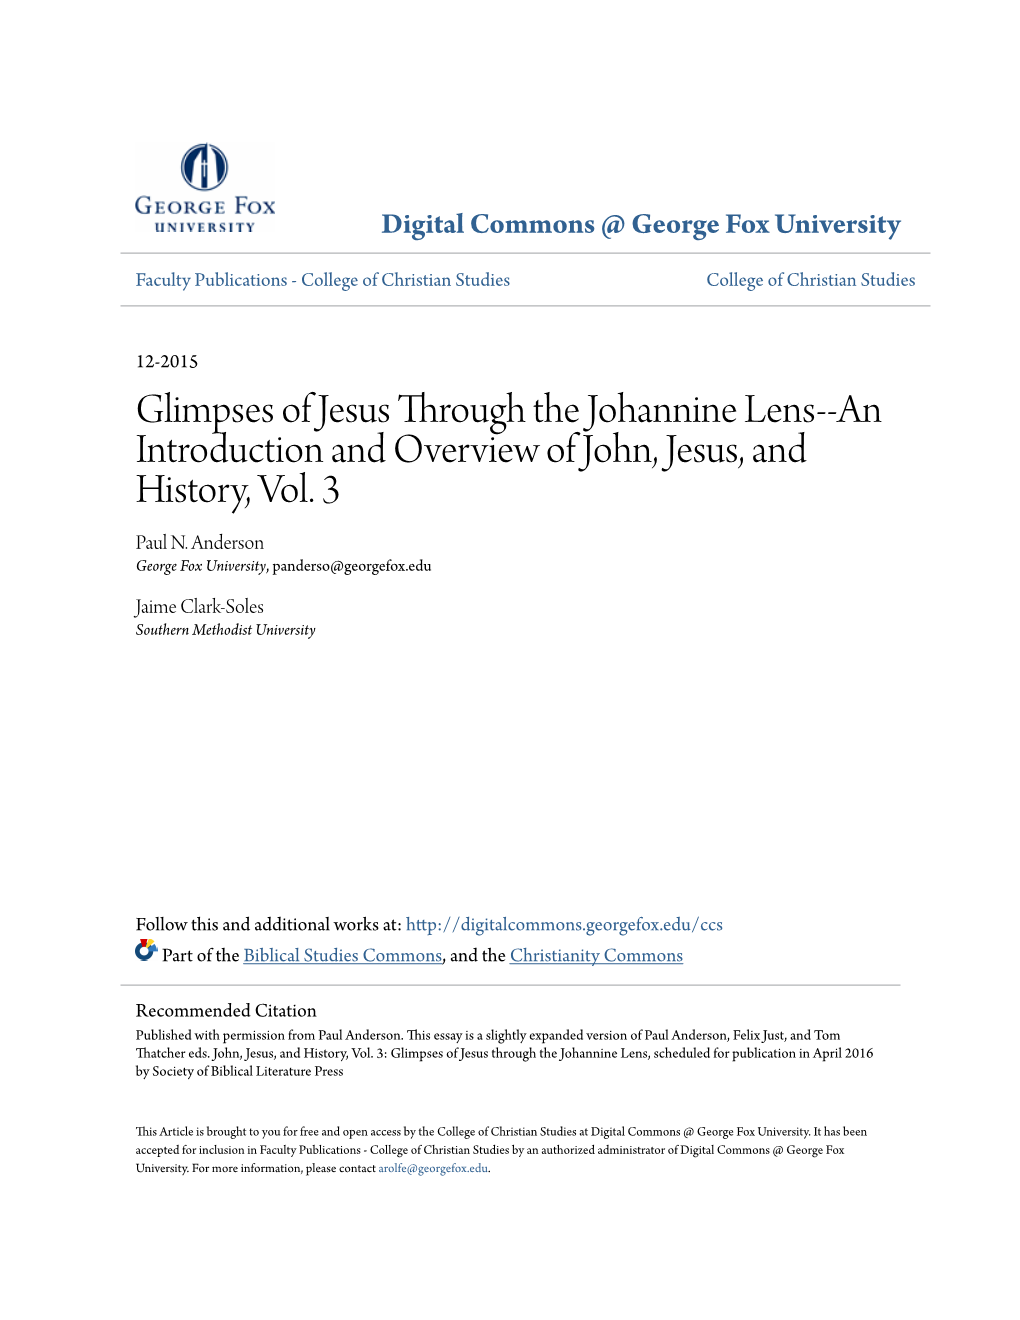 Glimpses of Jesus Through the Johannine Lens--An Introduction and Overview of John, Jesus, and History, Vol. 3 Paul N